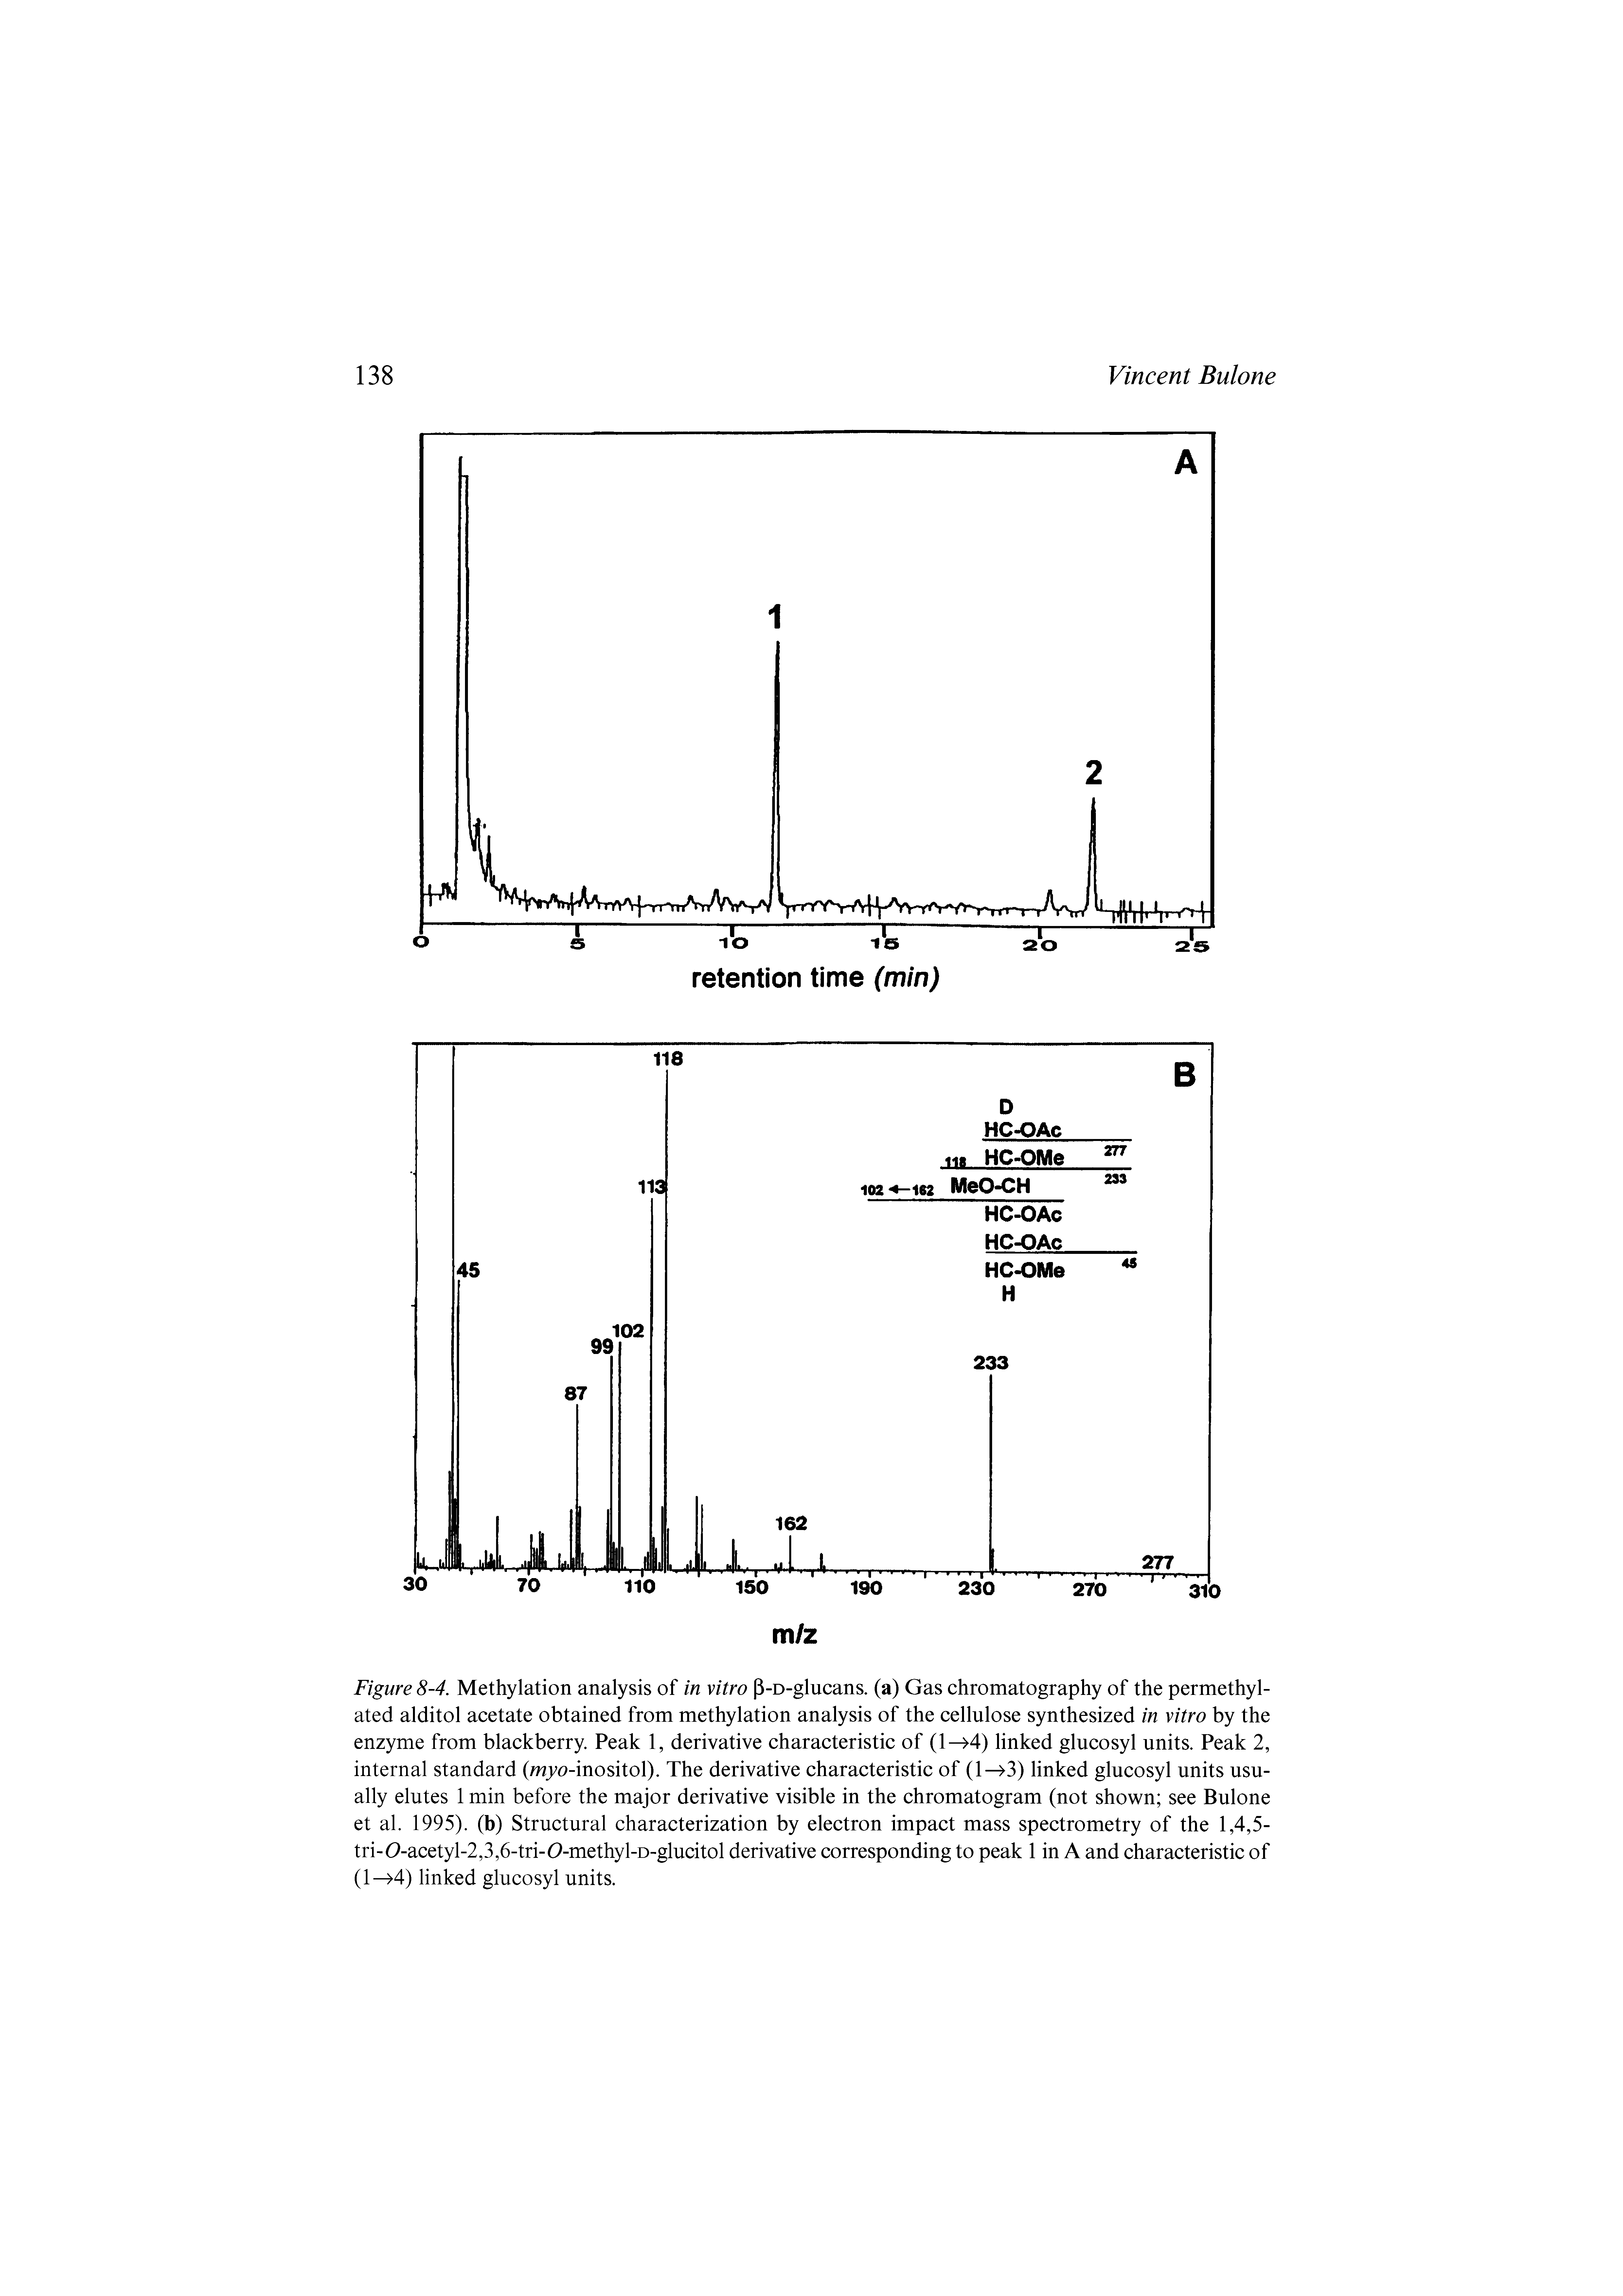 Figure 8-4. Methylation analysis of in vitro P-D-glucans. (a) Gas chromatography of the permethyl-ated alditol acetate obtained from methylation analysis of the cellulose synthesized in vitro by the enzyme from blackberry. Peak 1, derivative characteristic of (1 4) linked glucosyl units. Peak 2, internal standard (mj o-inositol). The derivative characteristic of (1 3) linked glucosyl units usually elutes 1 min before the major derivative visible in the chromatogram (not shown see Bulone et al. 1995). (b) Structural characterization by electron impact mass spectrometry of the 1,4,5-tri-0-acetyl-2,3,6-tri-0-methyl-D-glucitol derivative corresponding to peak 1 in A and characteristic of (1 4) linked glucosyl units.